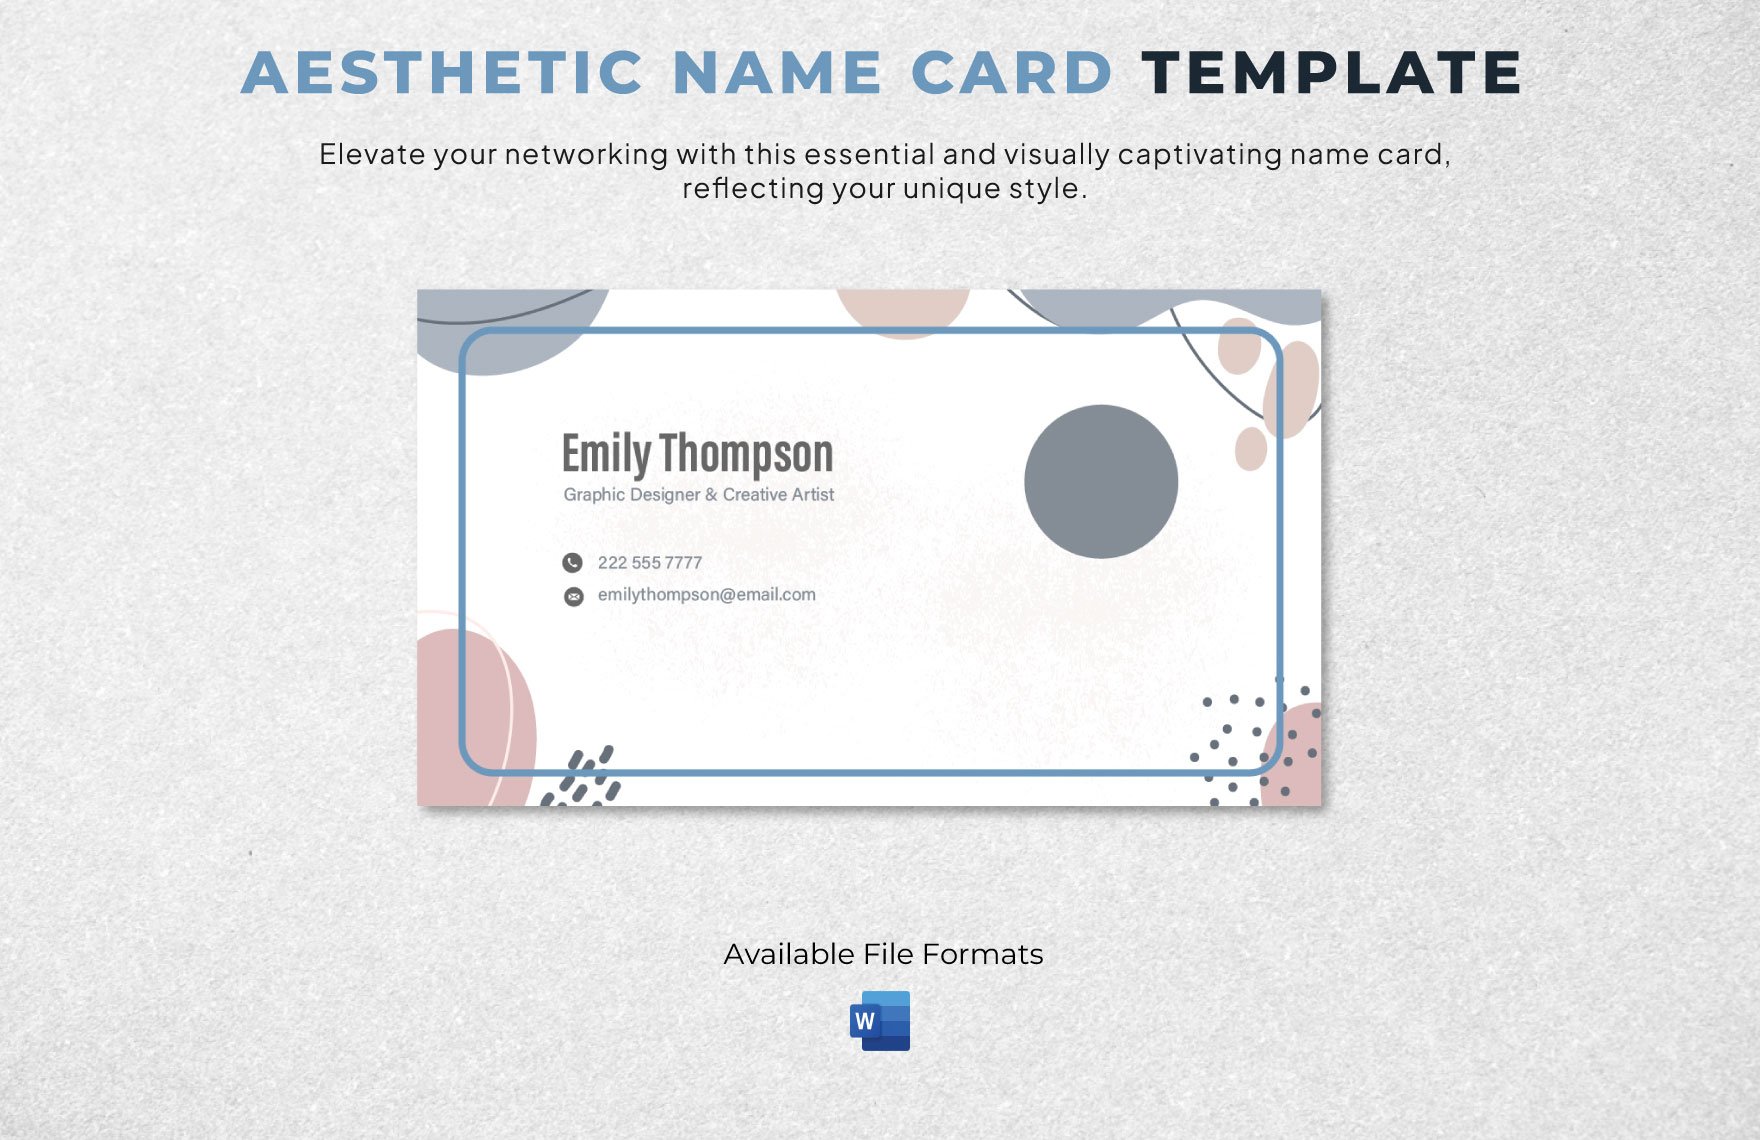 Wedding Graphic Design Name Card Template in Word Illustrator